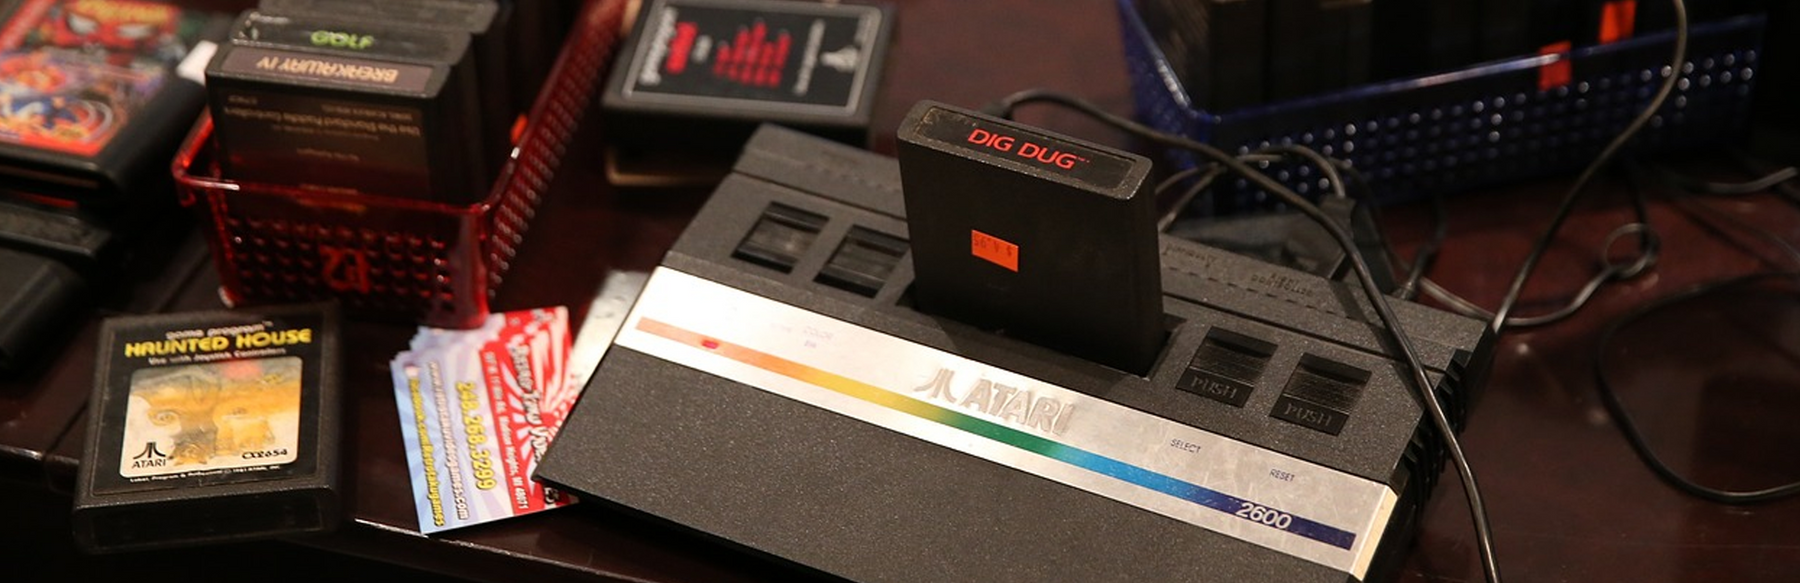 The best-selling games for the Atari 2600.